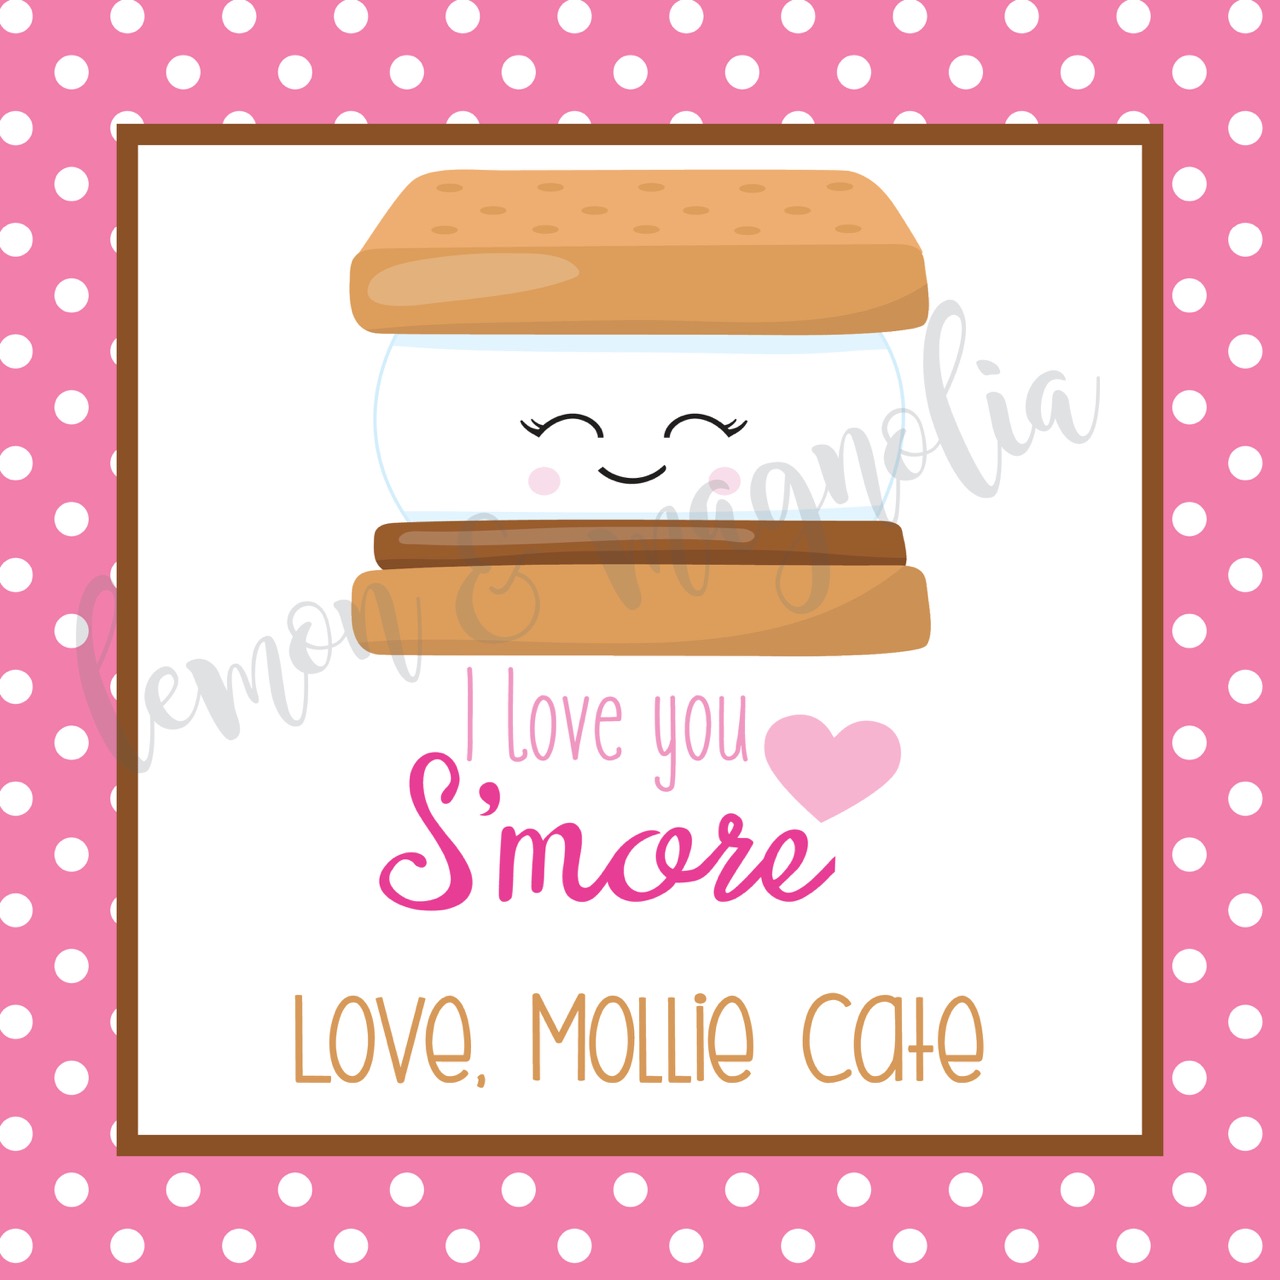 Pink Polka Dot S'mores Valentine's Day Gift Tag